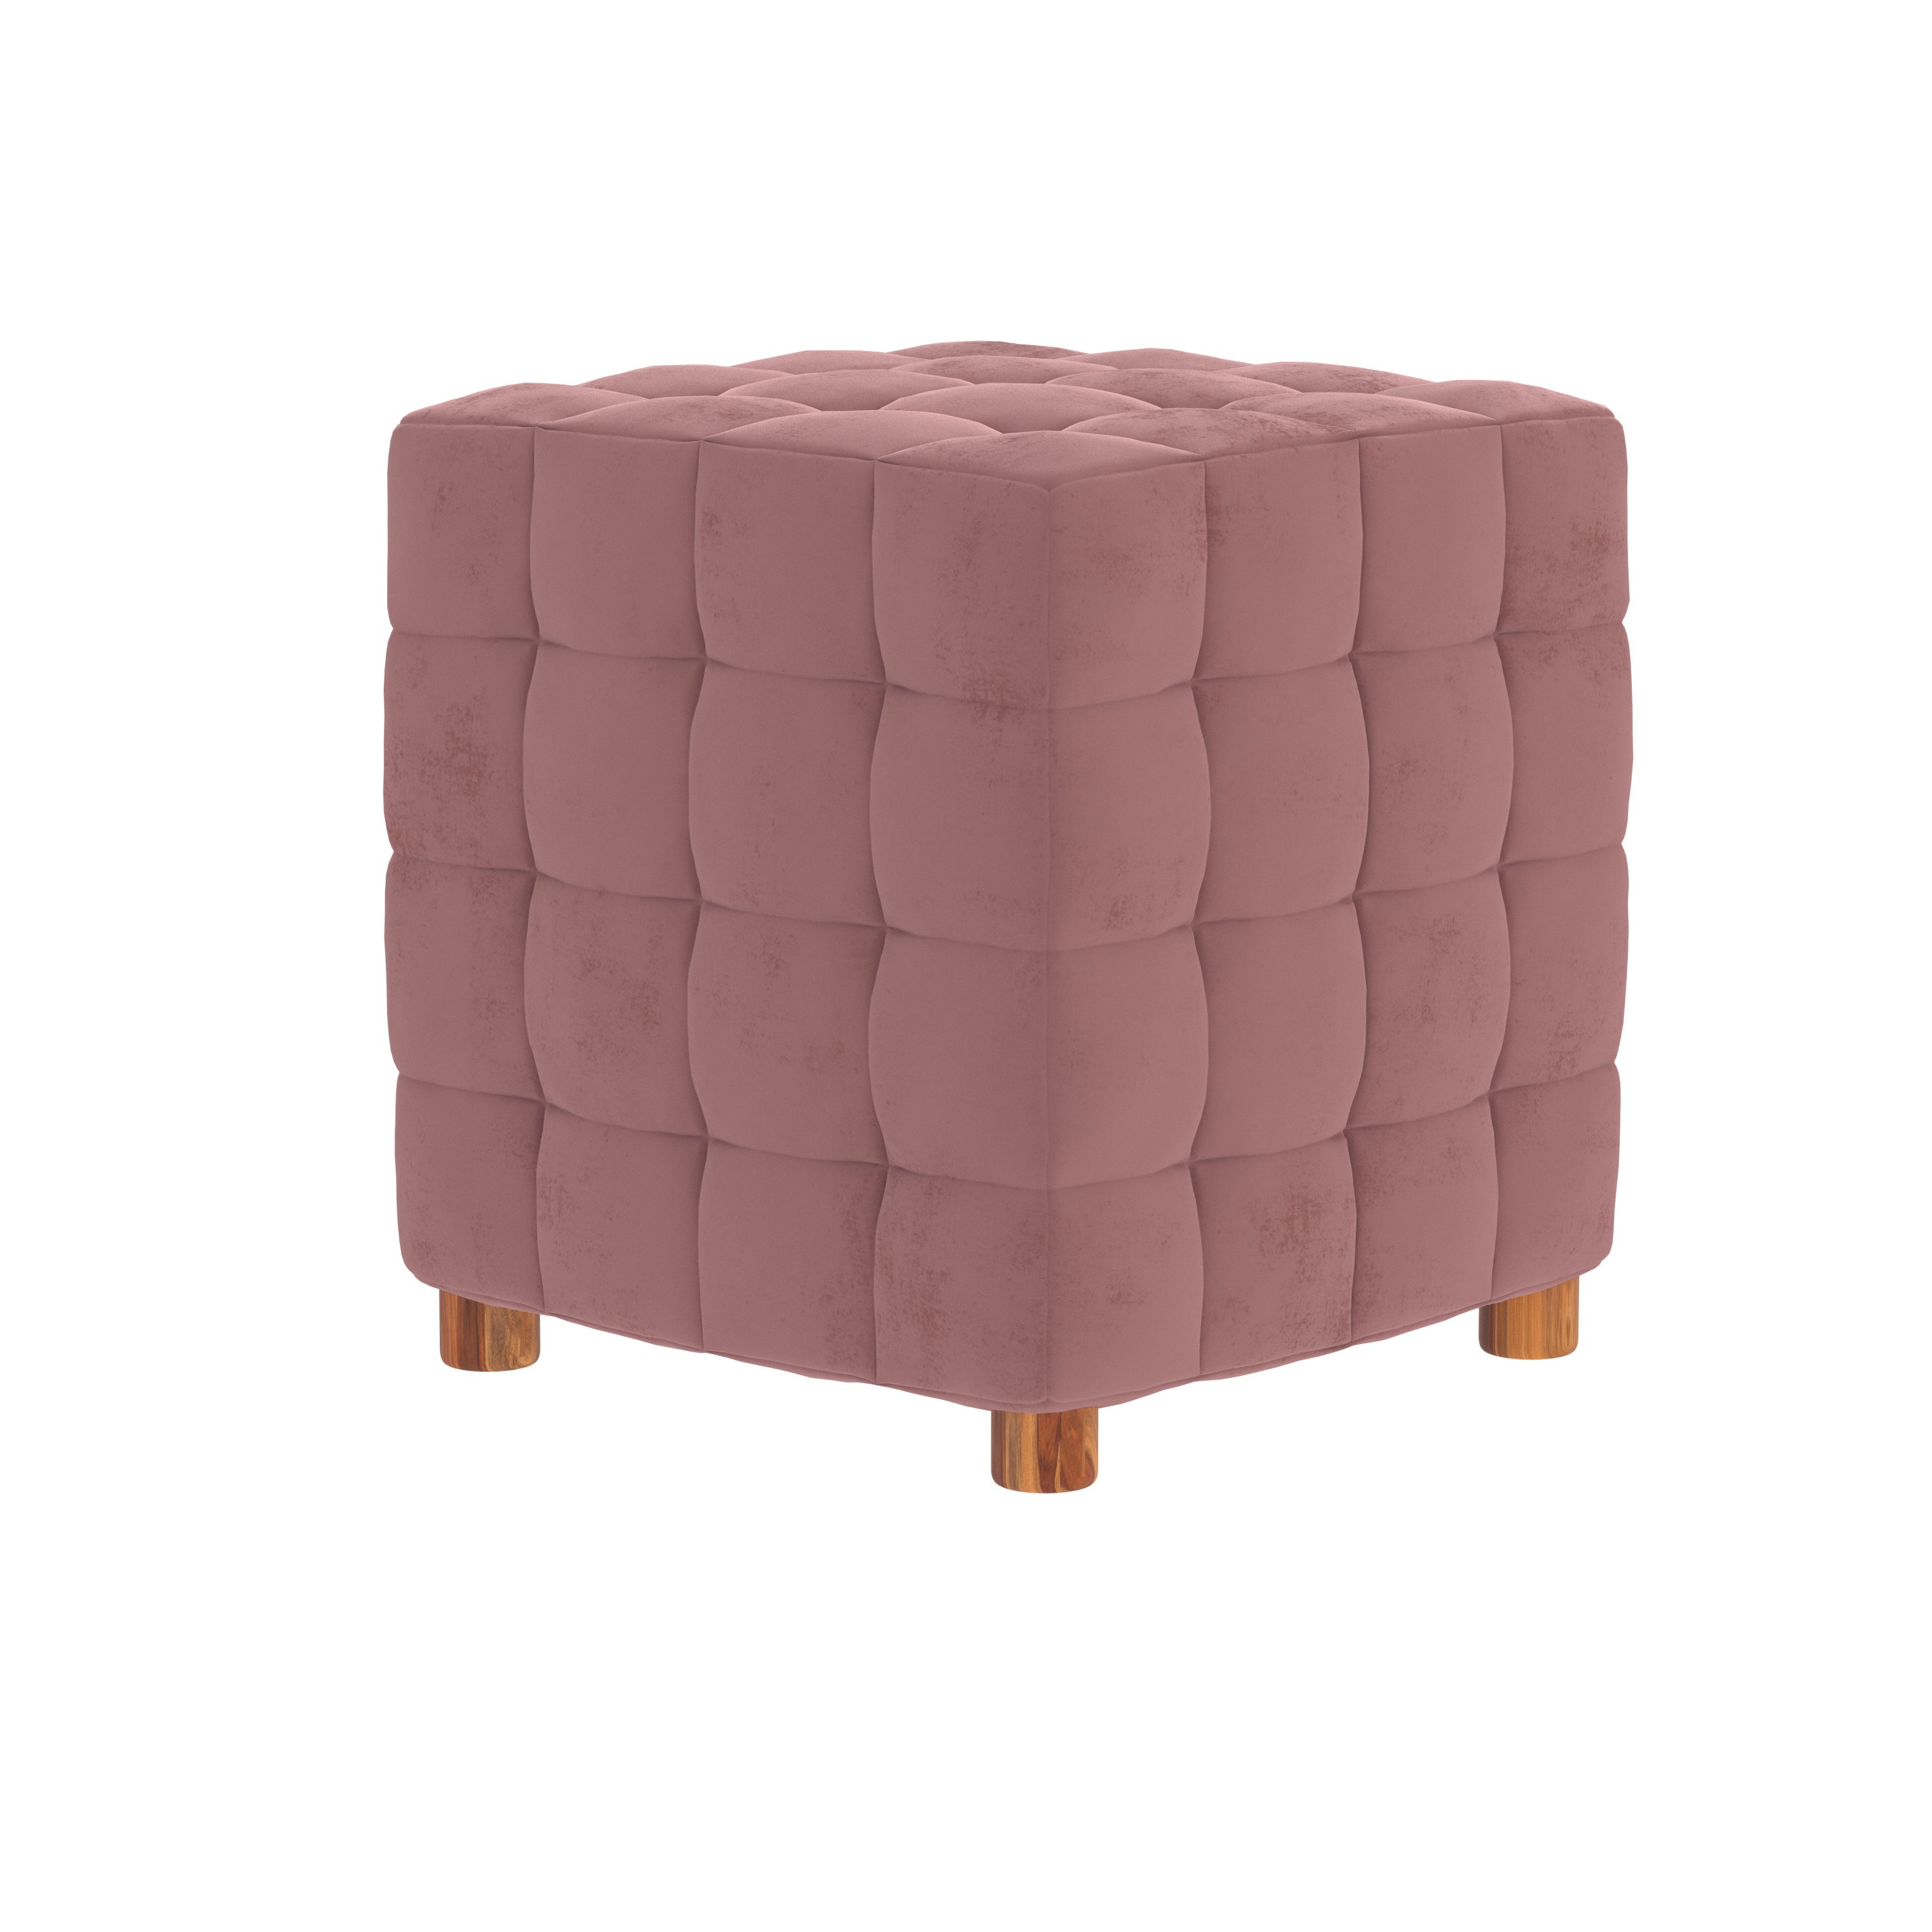 Antique Pulp Pink Wooden Smooth Finish Light Seating Stool Pouf